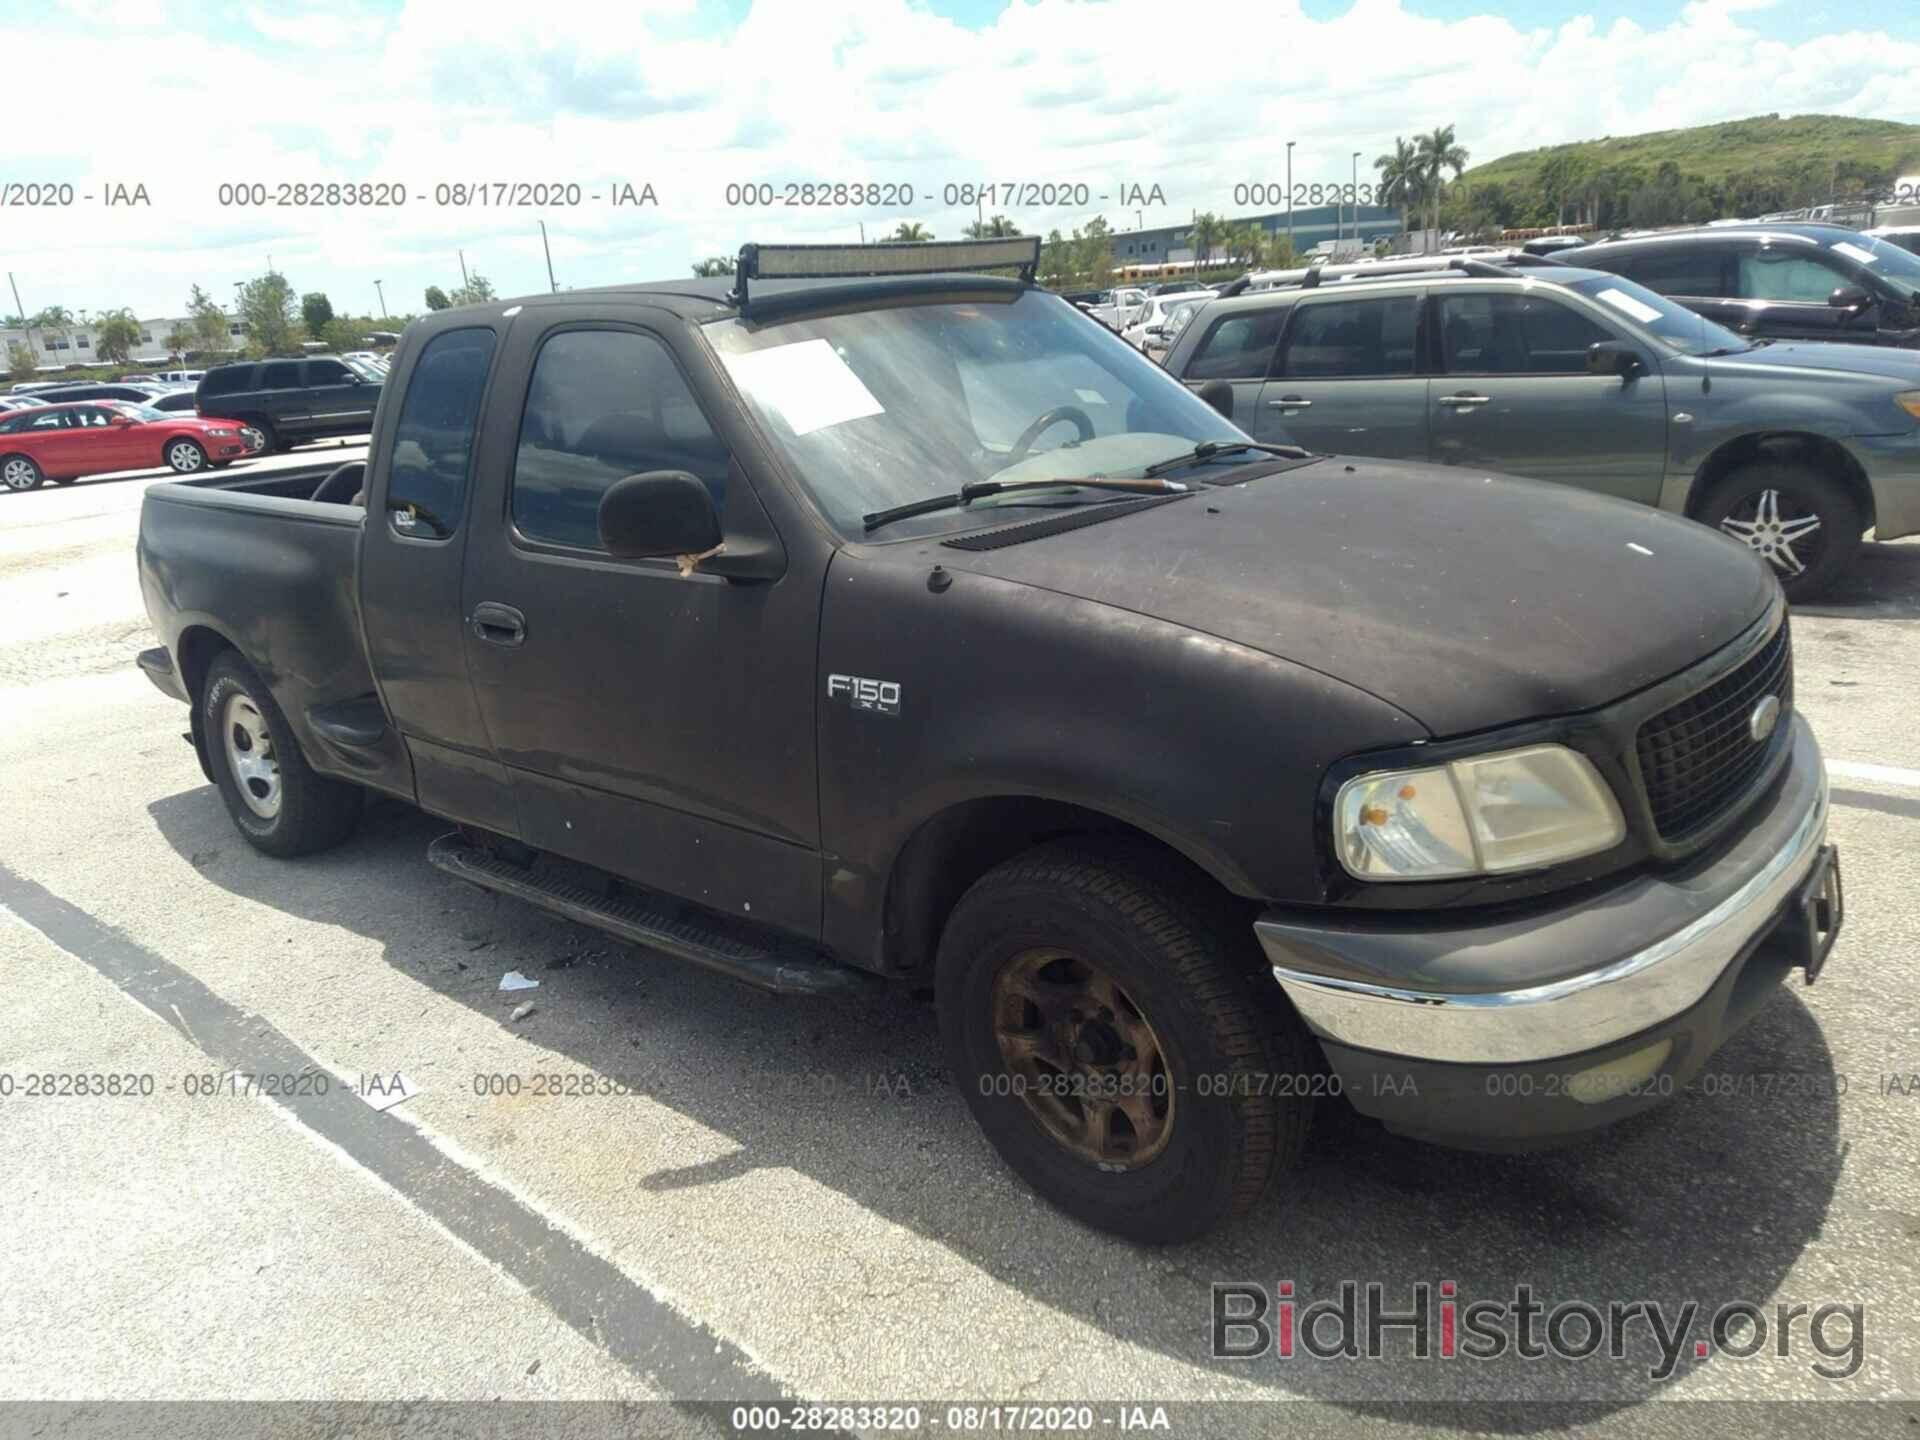 Photo 2FTZX0724XCA88189 - FORD F-150 1999